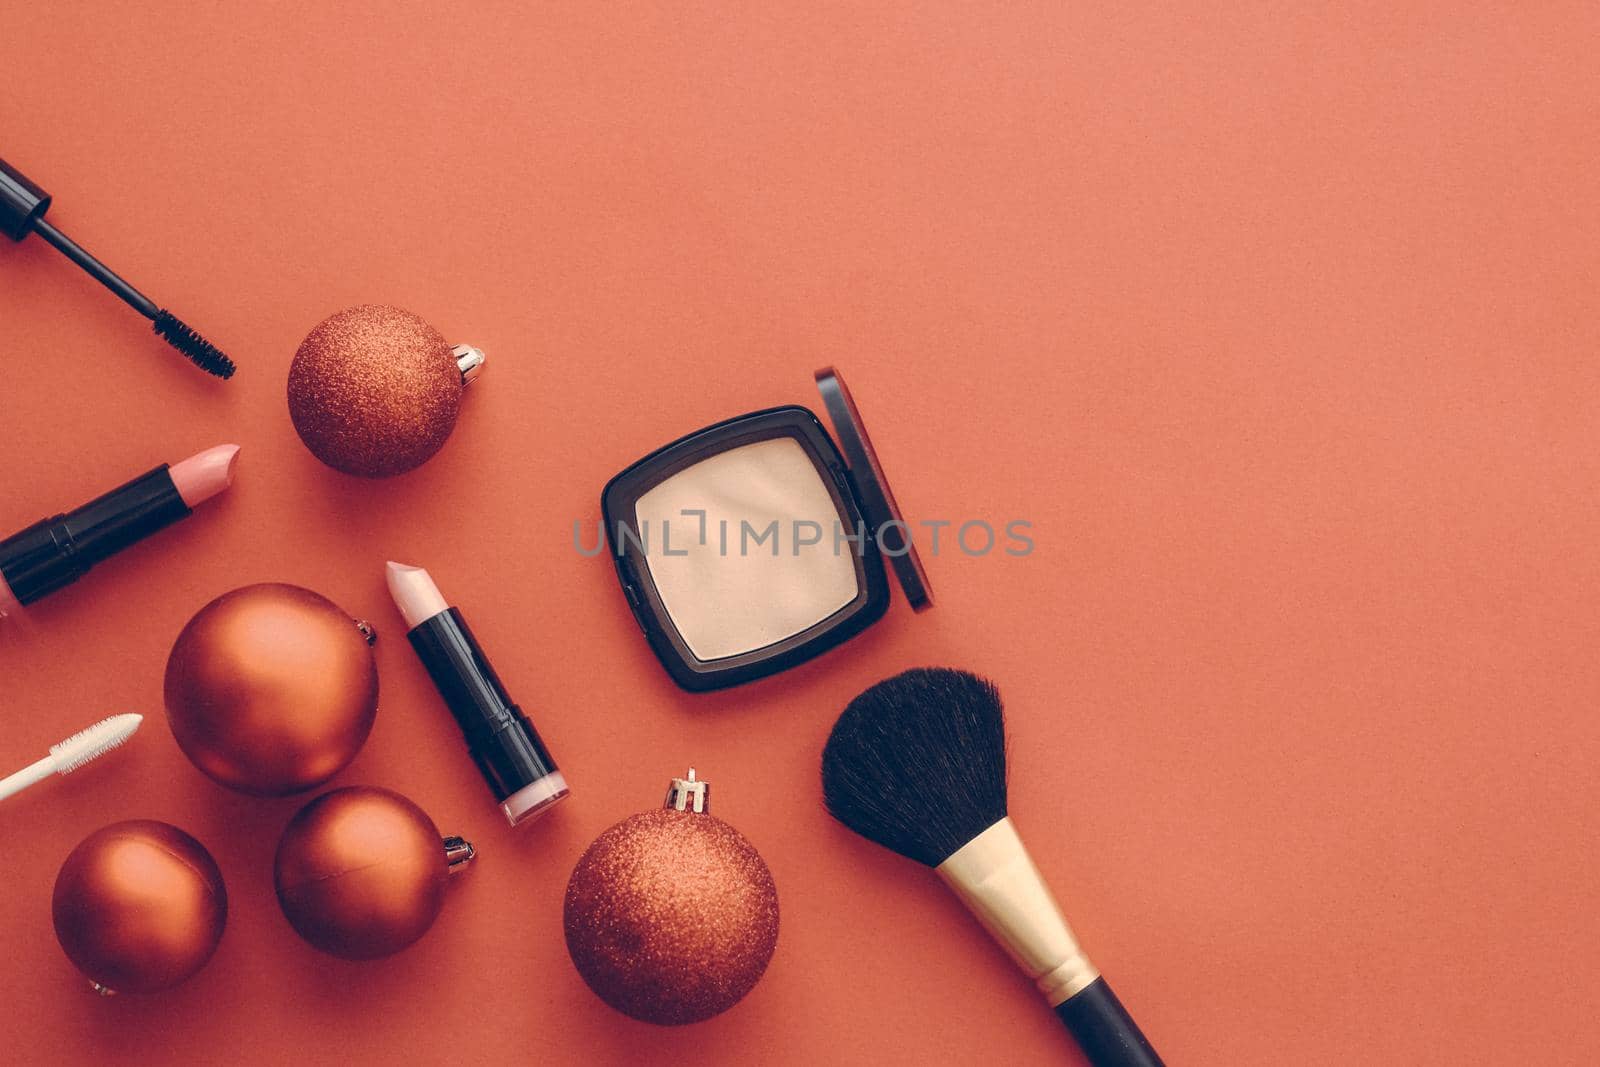 Make-up and cosmetics product set for beauty brand Christmas sale promotion, vintage orange flatlay background as holiday design by Anneleven